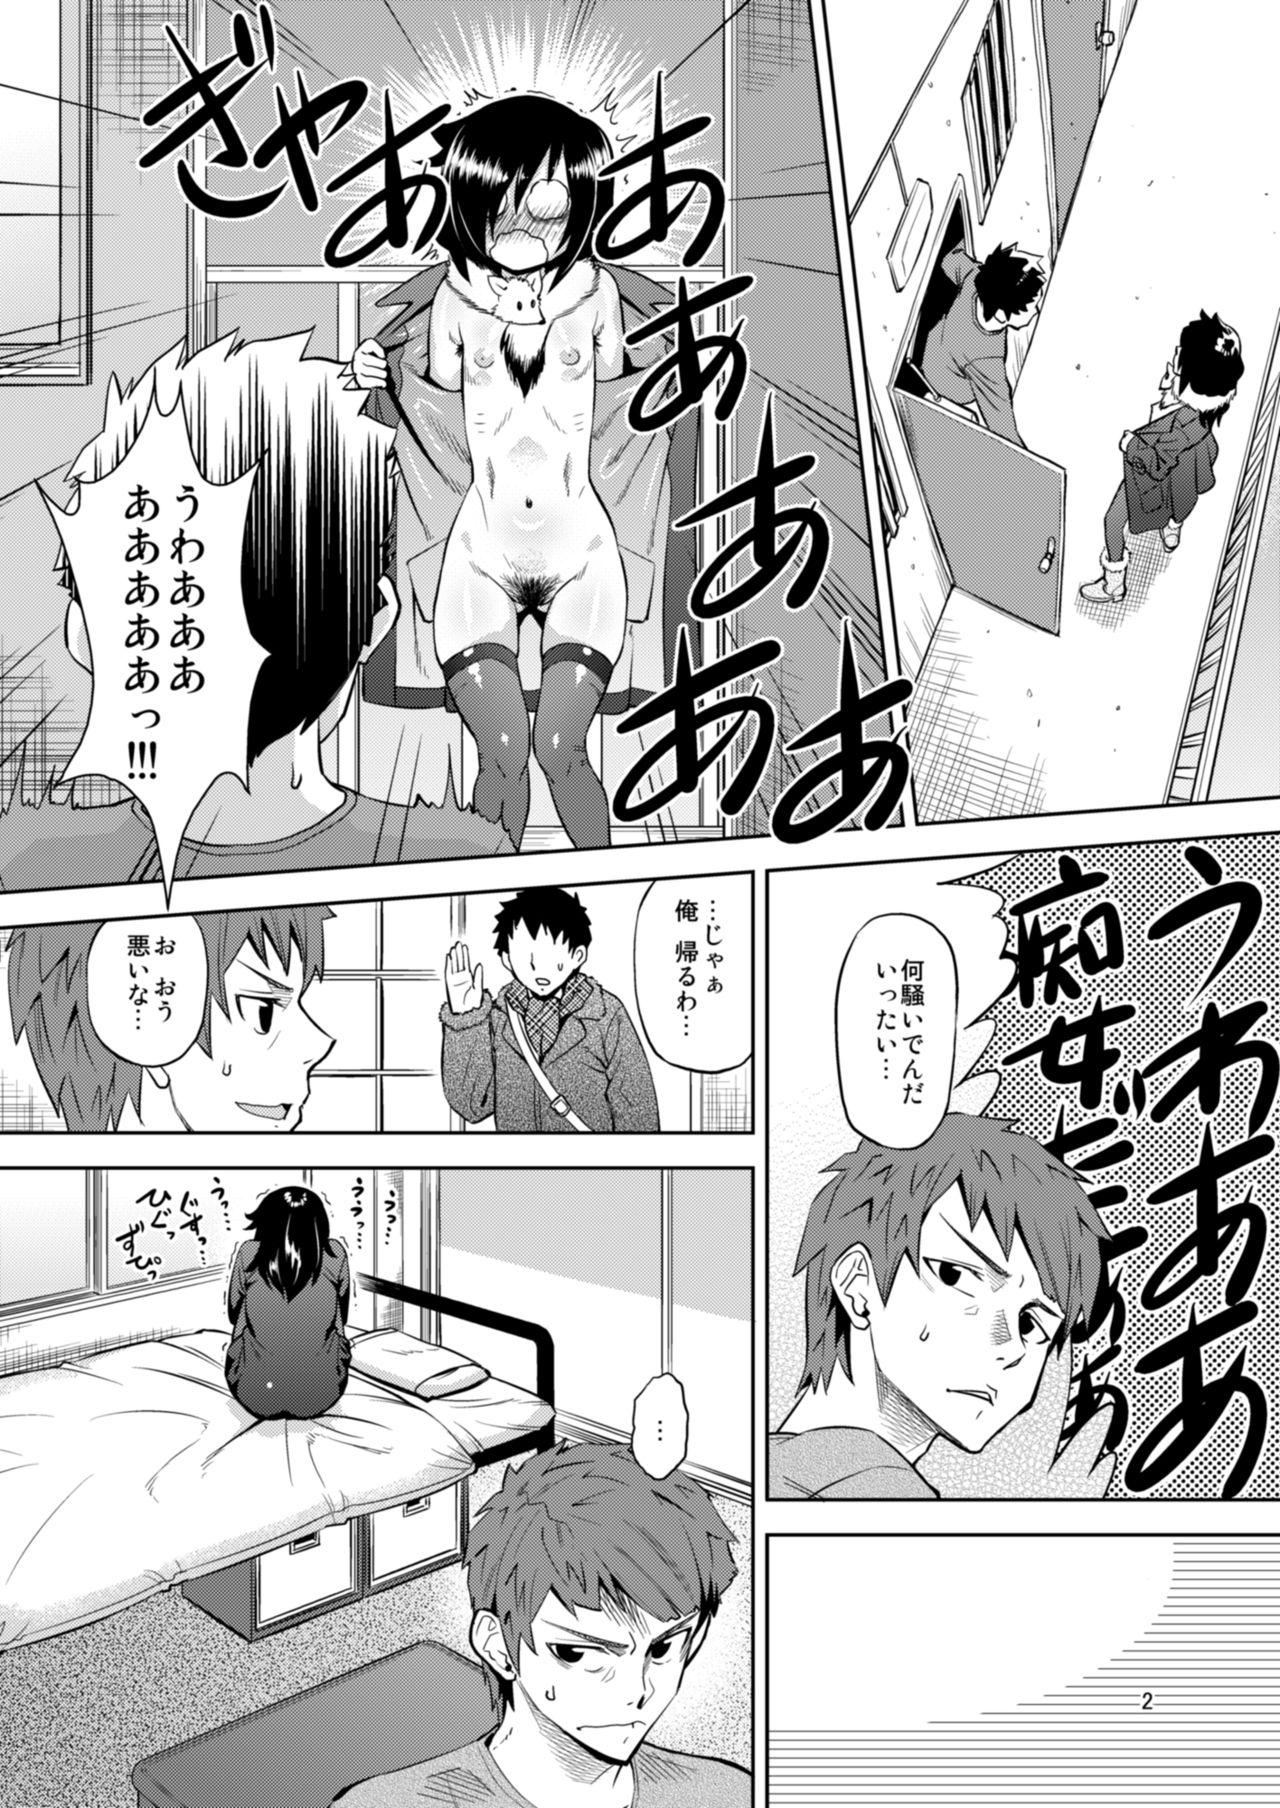 Gayfuck Mesubuta to Yonde - Its not my fault that im not popular Uncut - Page 4